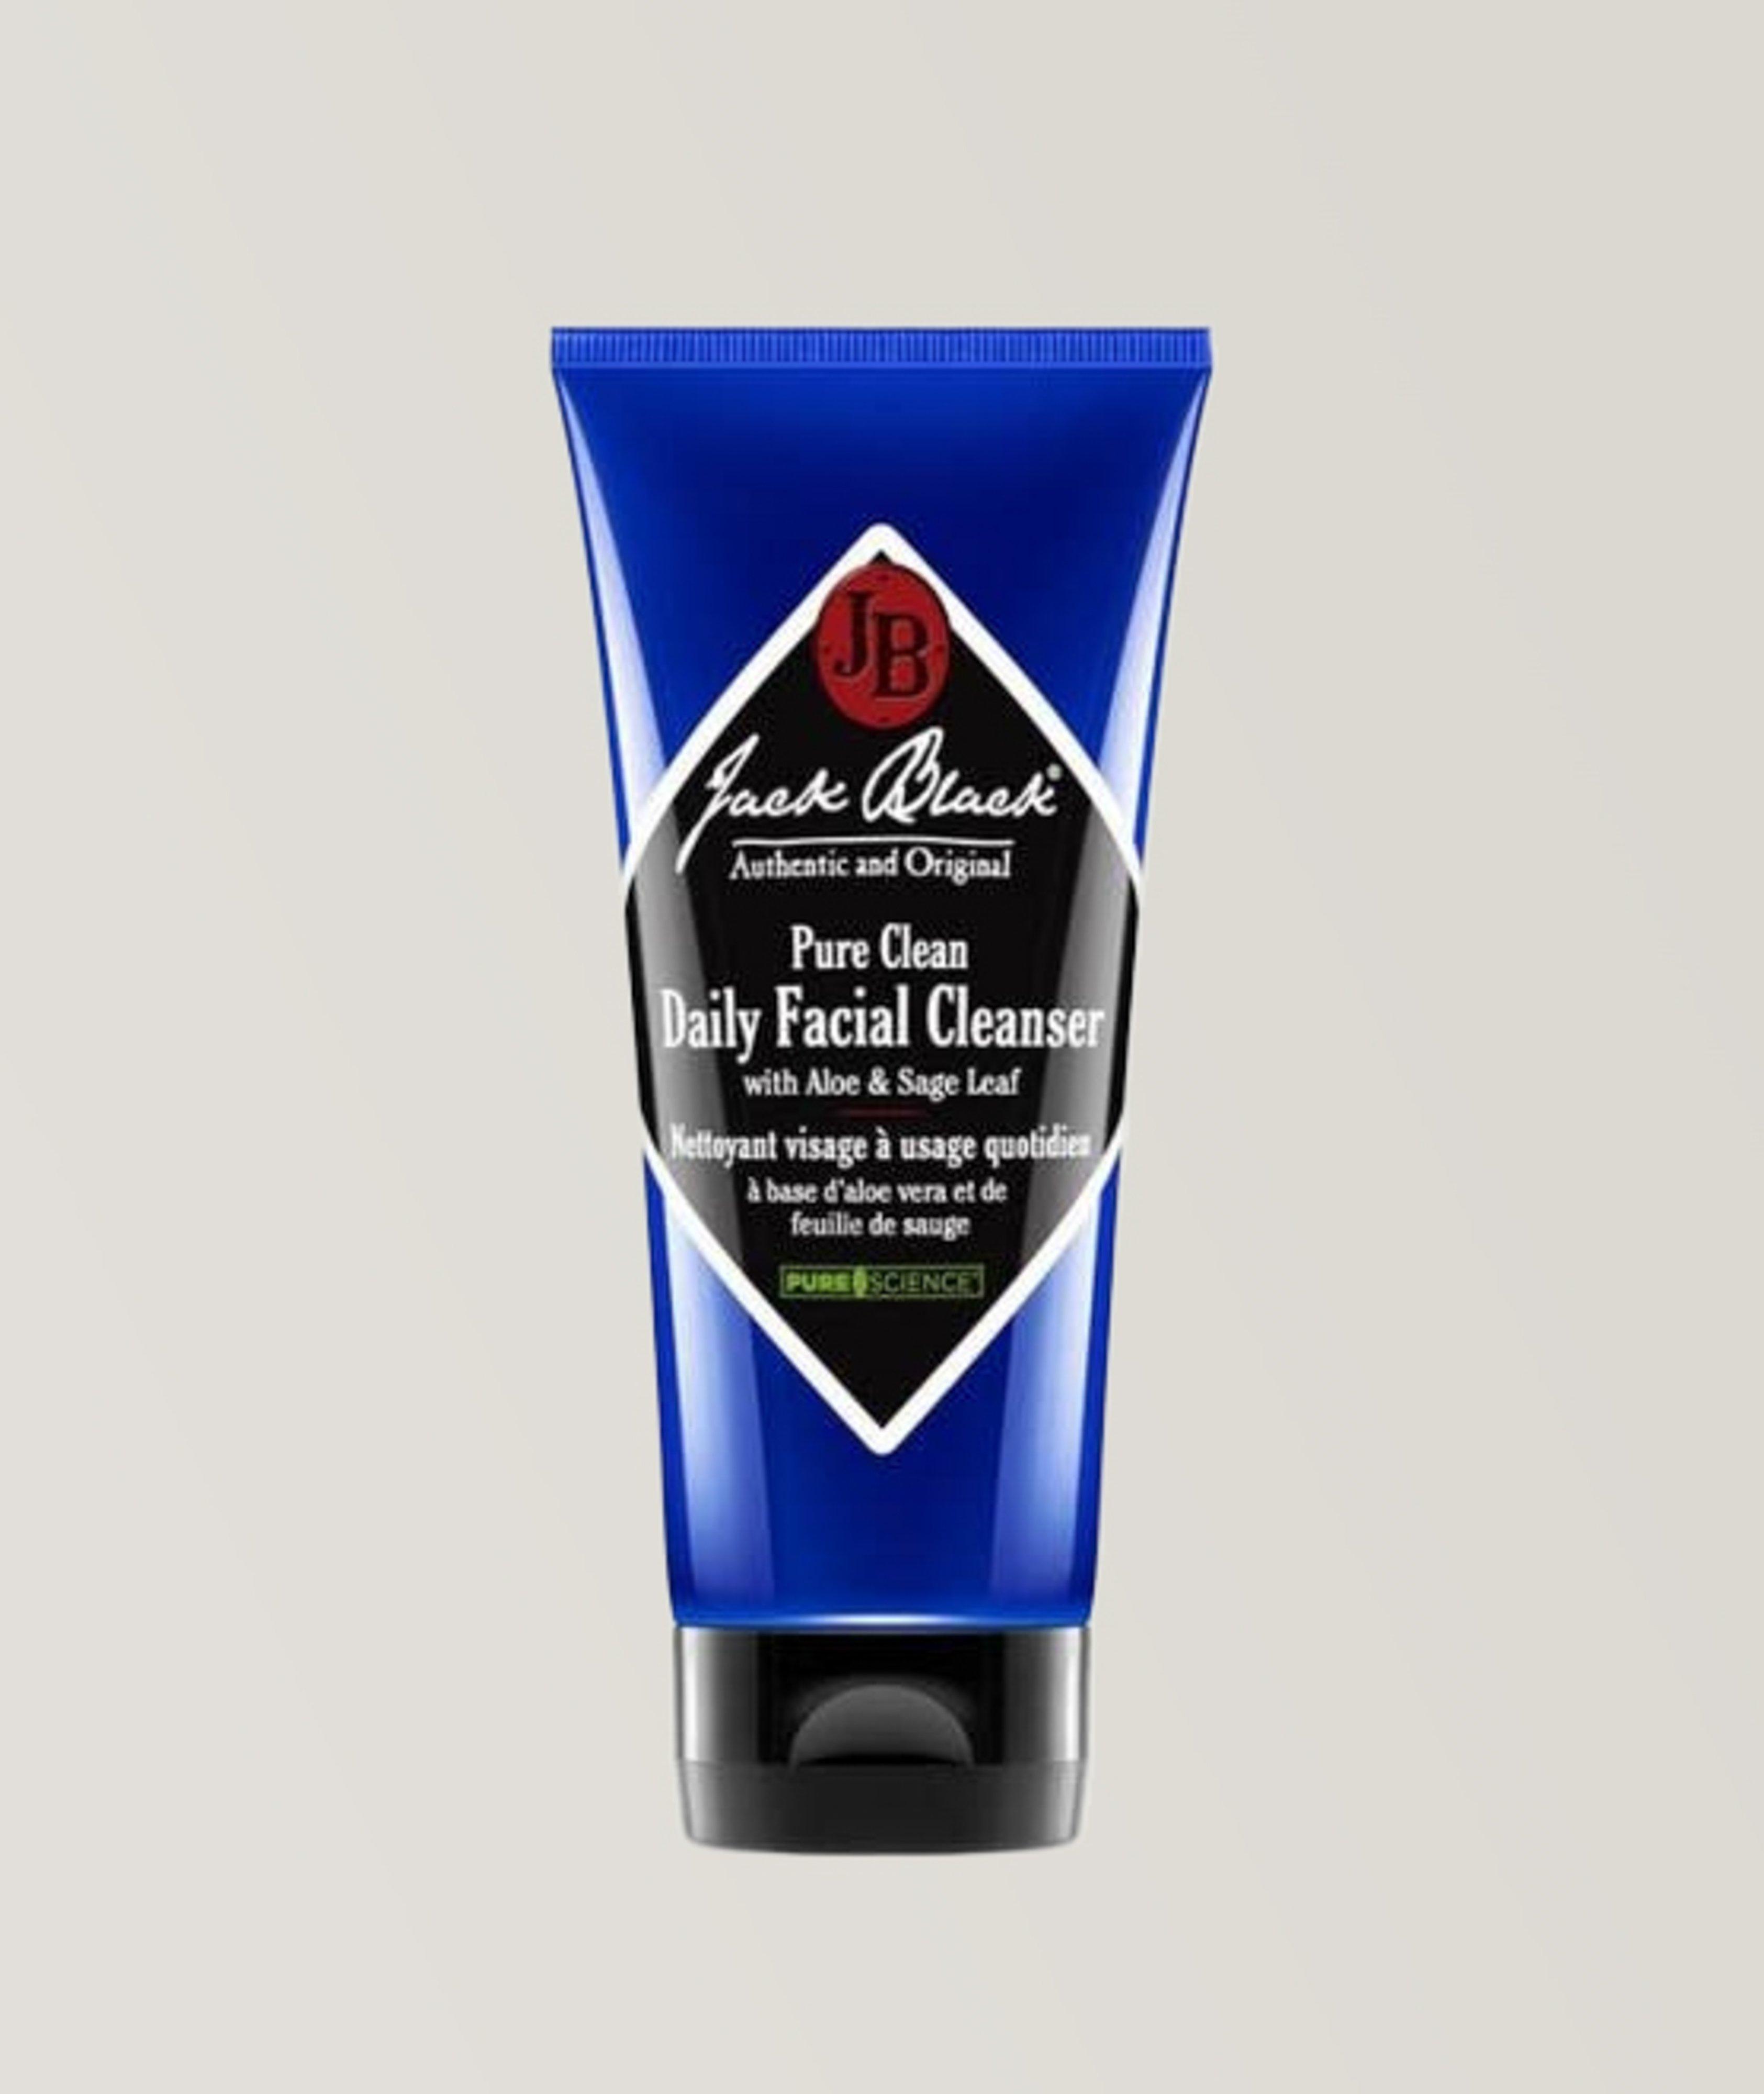 Pure Clean Daily Facial Cleanser image 0